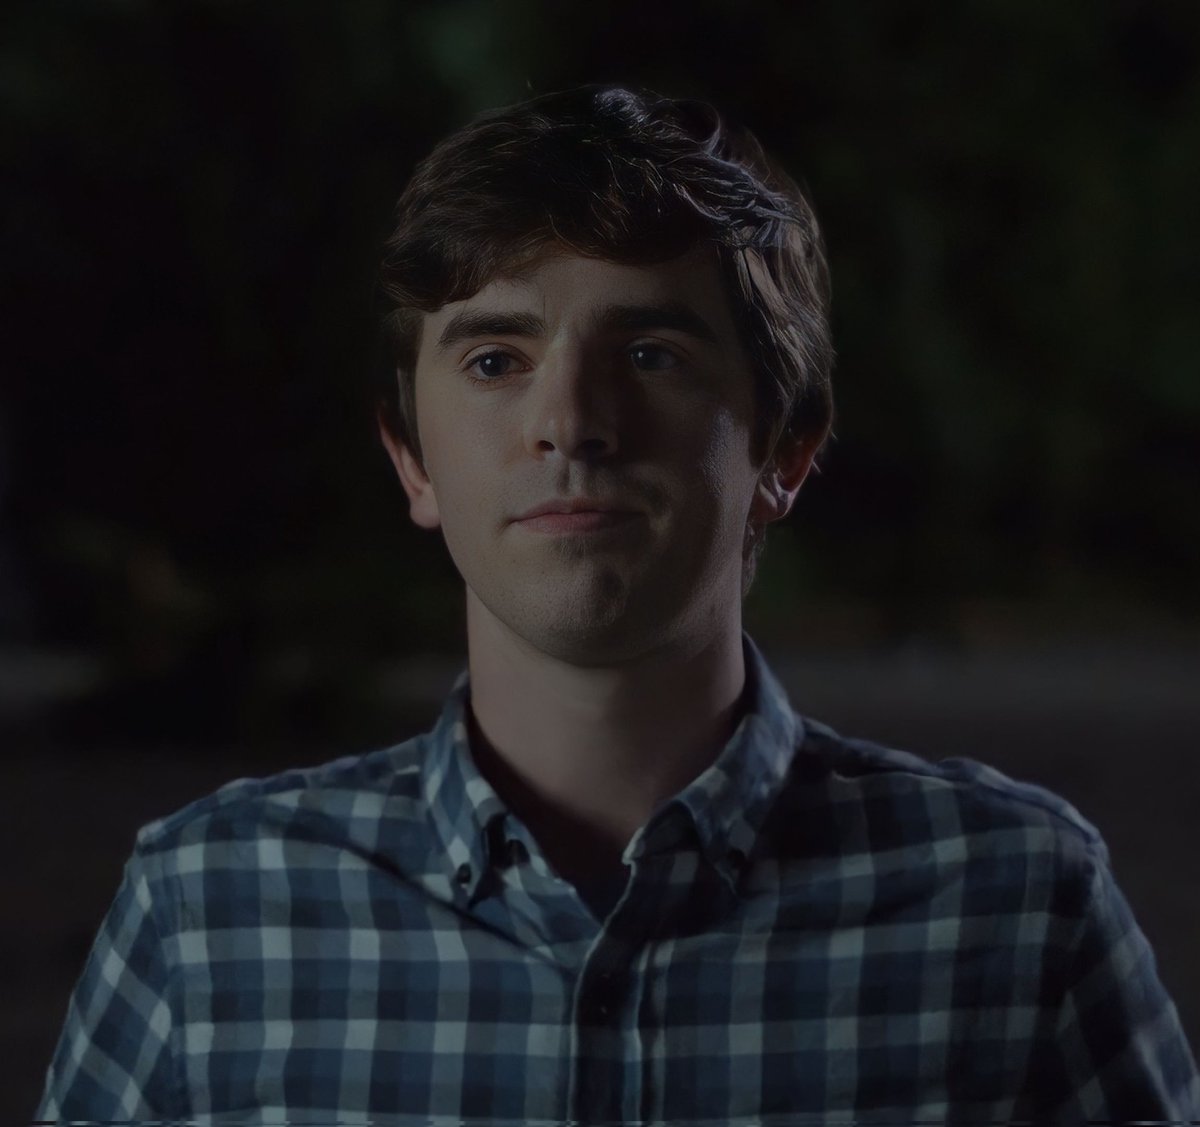 Shaun waiting for Lea to surface in that lake in Casper,  Wyoming 😦
🥞🍏💖💙 #FreddieHighmore #DrDimples #DrShaunMurphy #TheGoodDoctor @freddiehighmore @GoodDoctorABC @SPTV @ABCSignature 
Screencap by @mskitkat2u ♾️💖💙